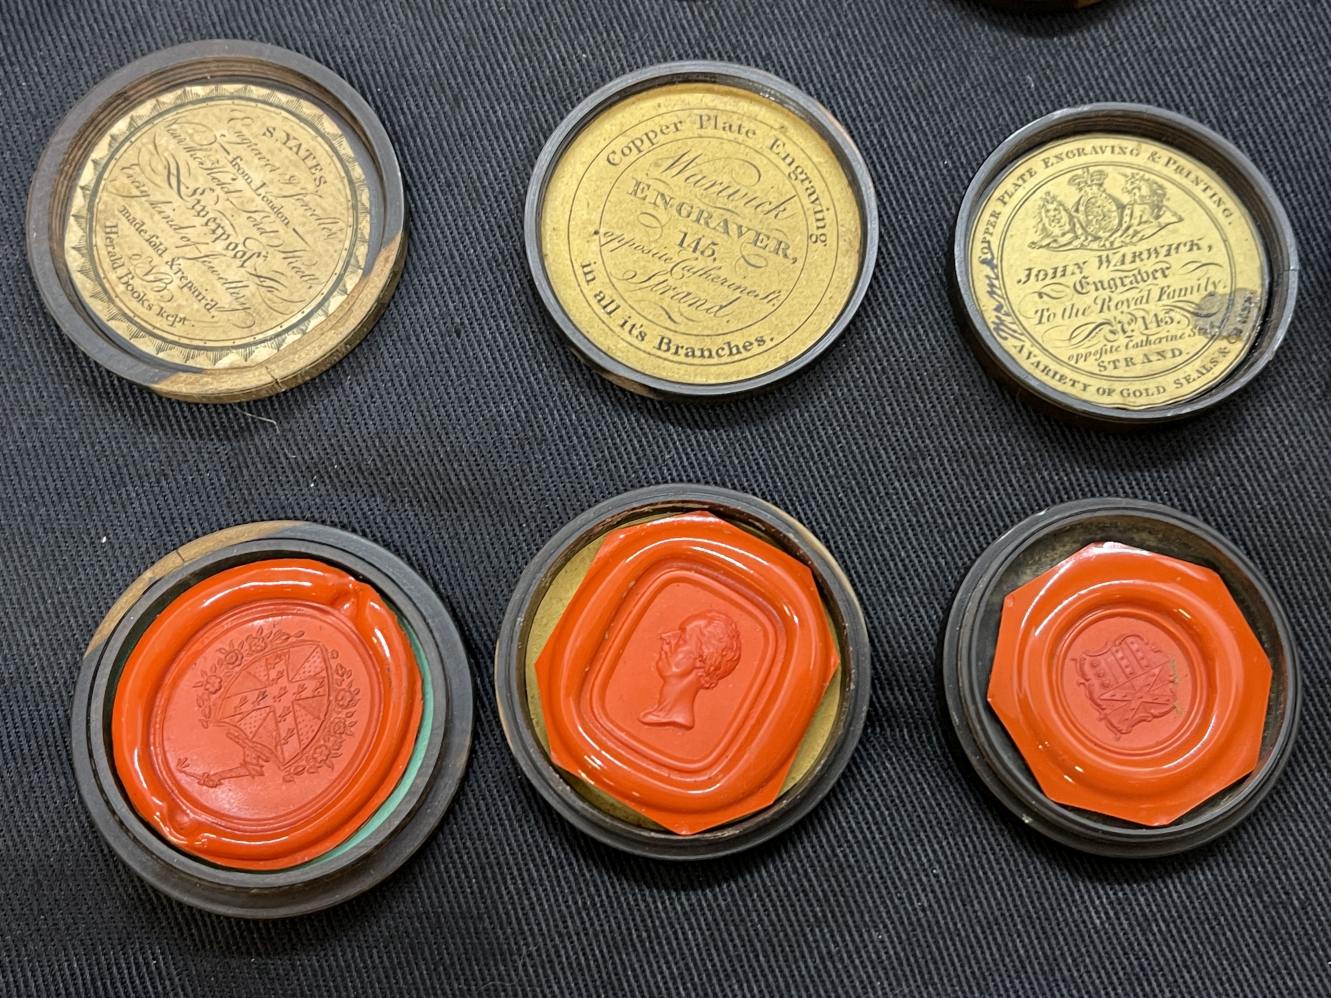 19th cent. Lignum Vitae cased wax seals, various London makers. Sizes range from 1ins. to 1½ins. (9) - Image 2 of 2